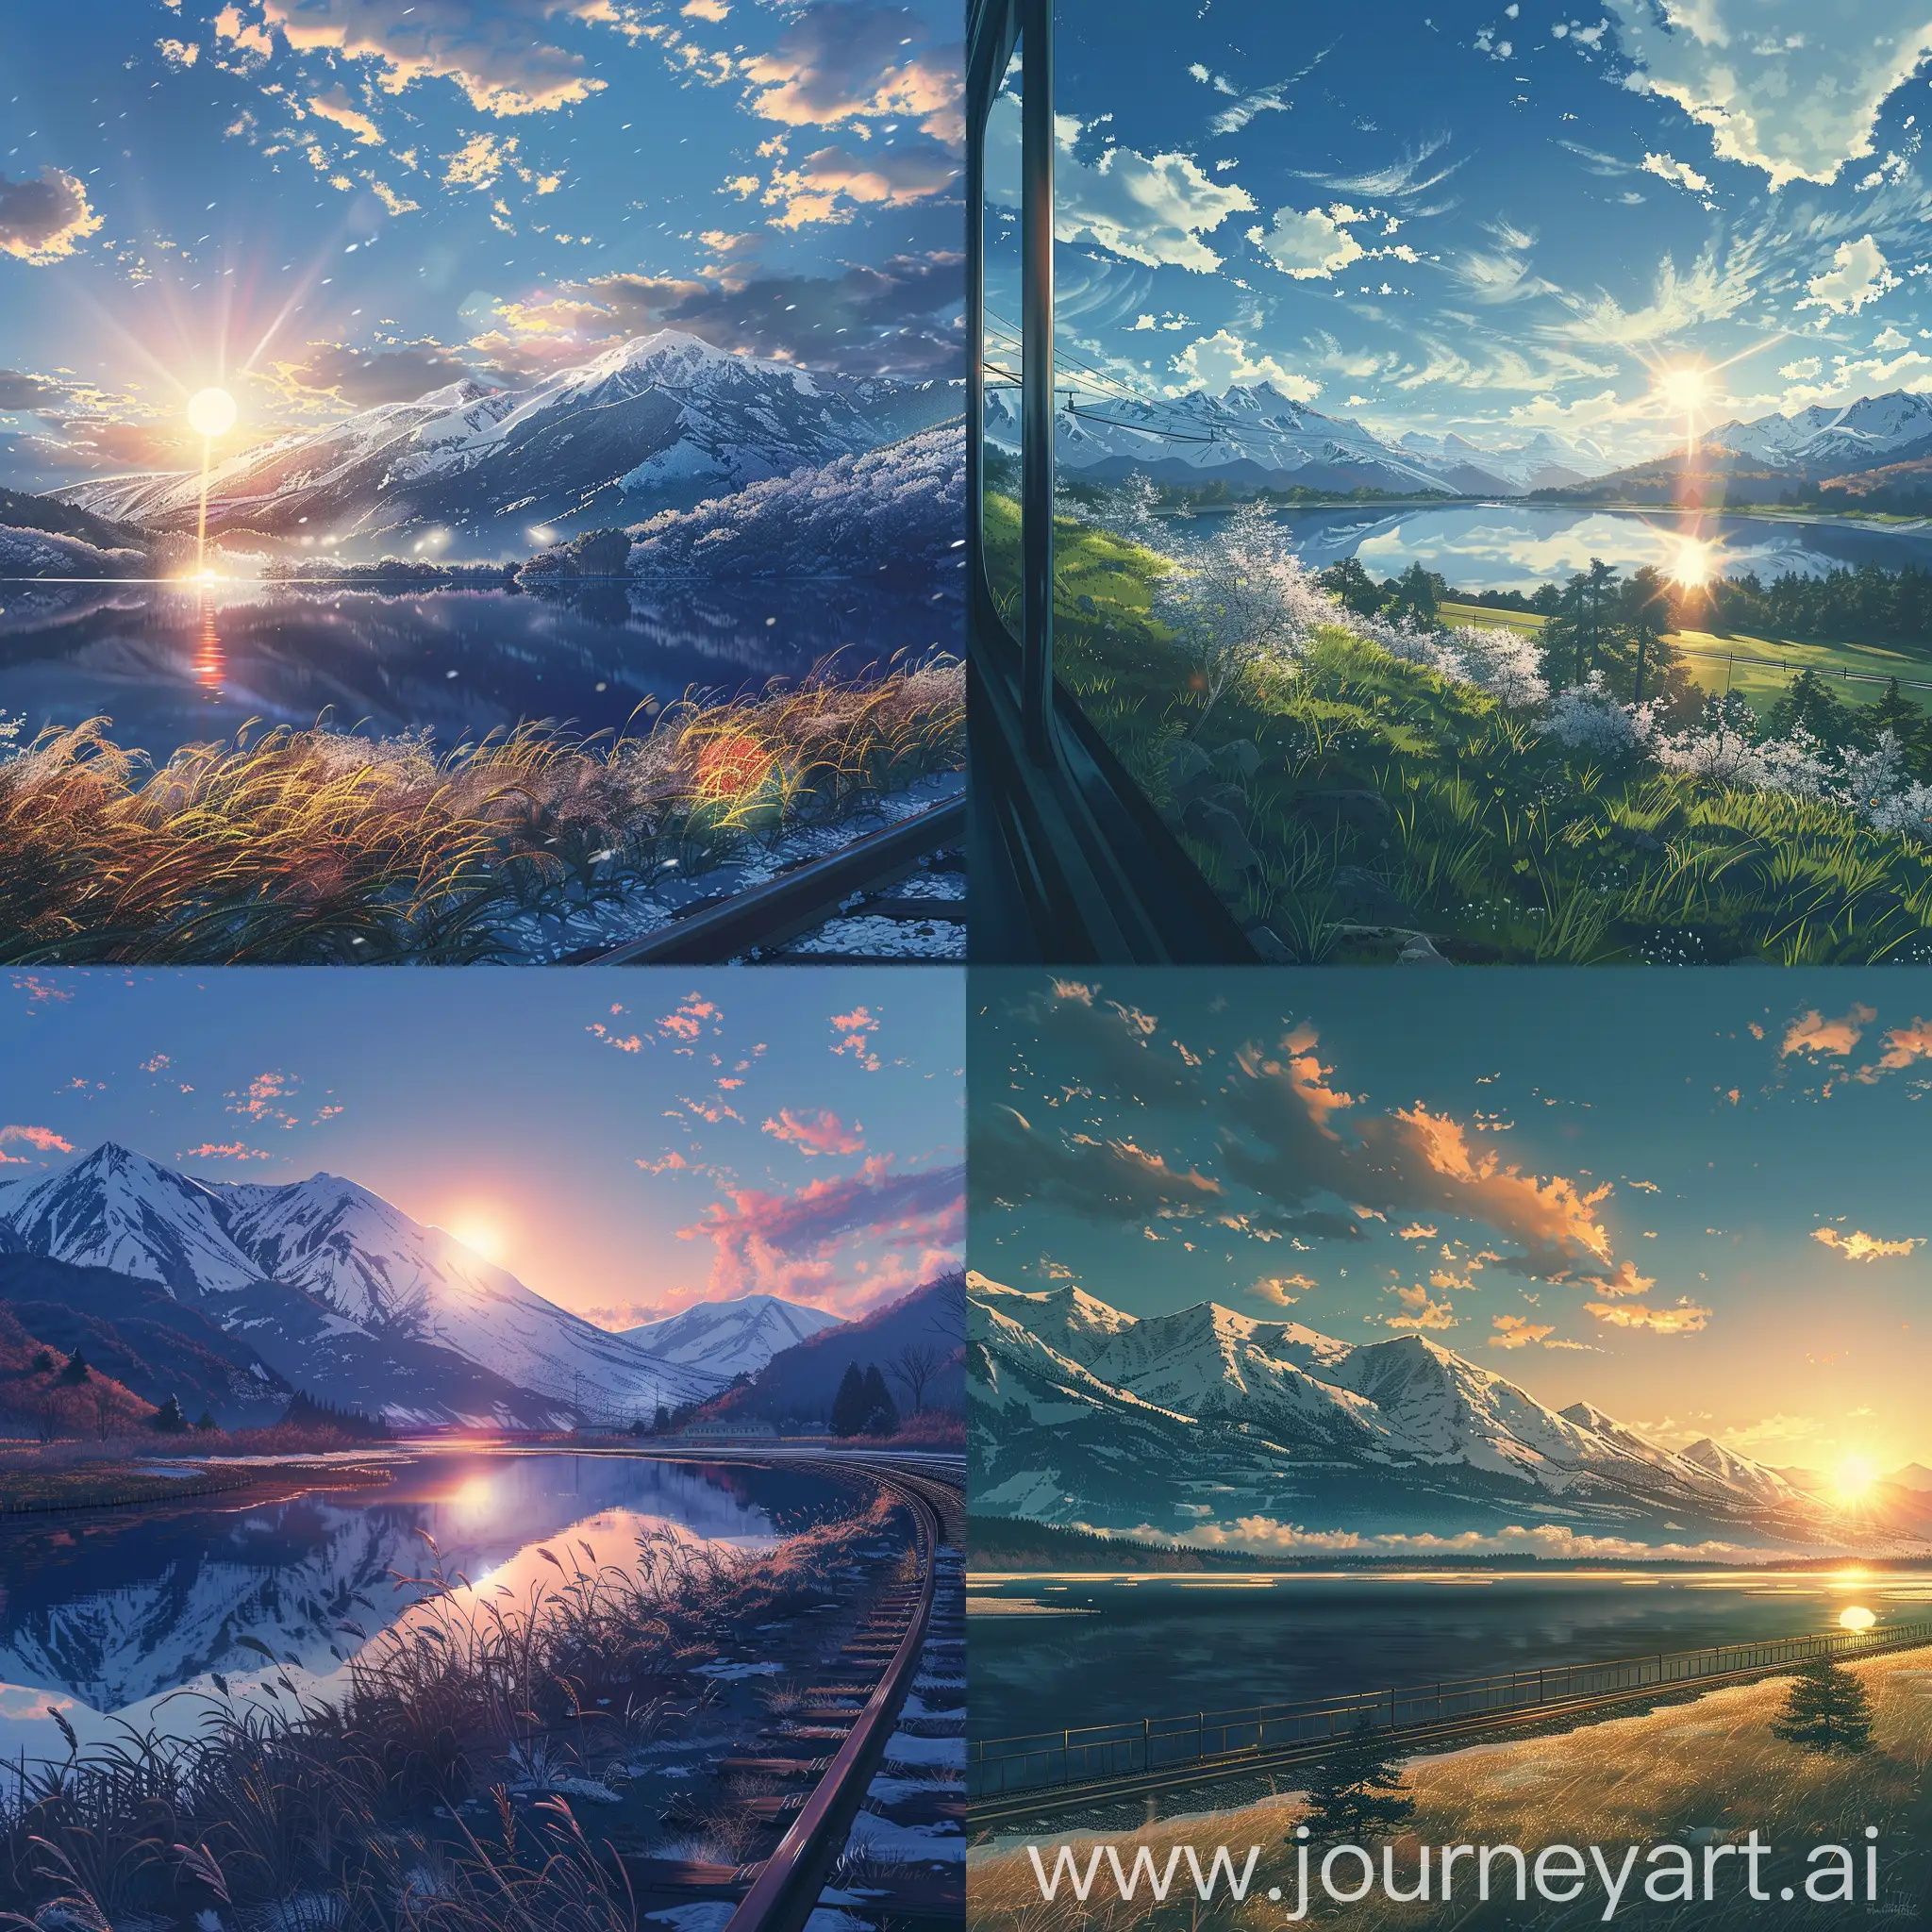 Anime scenary, dawn time, illustration ,view from train, snowy mountains, lakes, spring touch, serenity, cool tone, illustration, sun, beautiful scenary, Ultra hd, grassland, anine scenary, mokoto shinkai style, no blurry image, no hyperrealistic --ar 27:32 --s 400